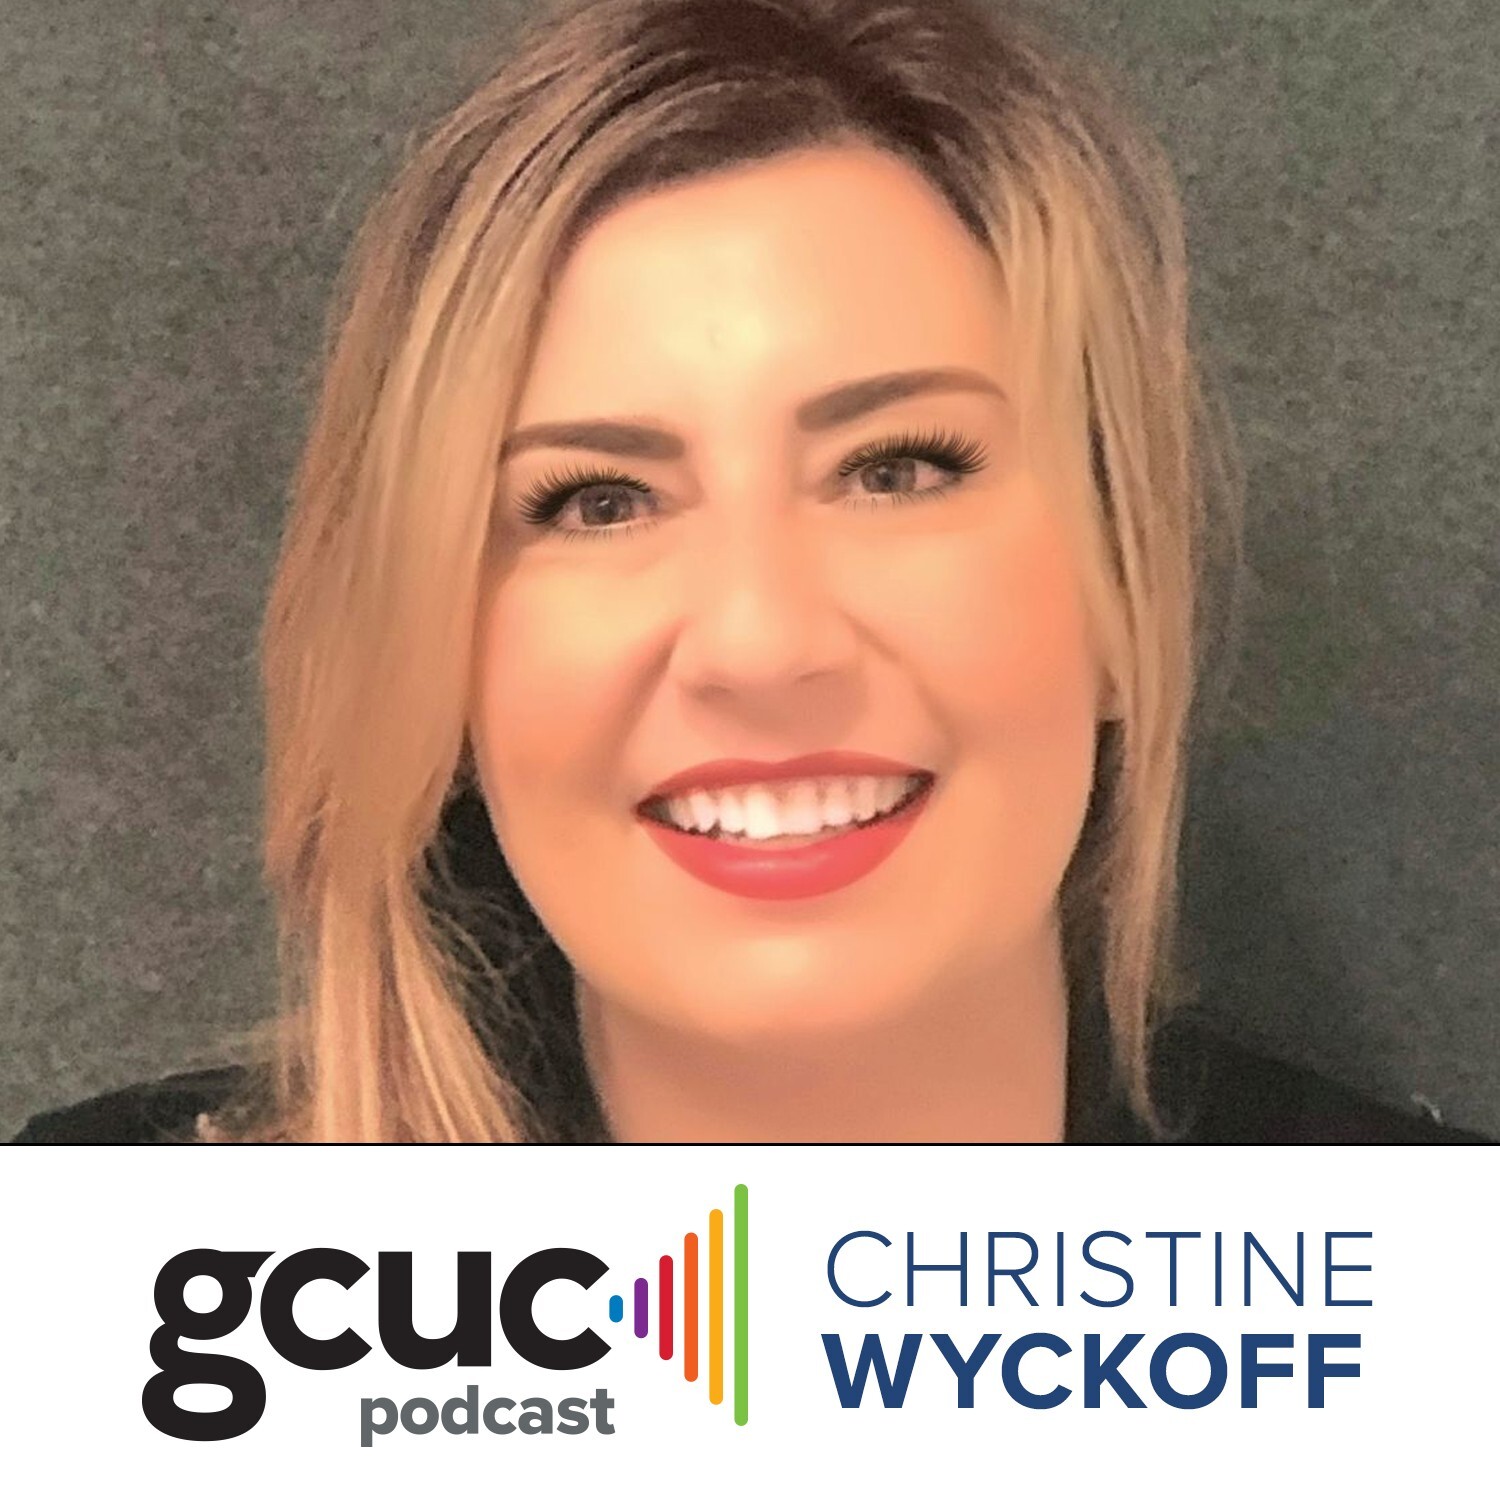 GCUC Podcast - Christine Wyckoff, Director of Enterprise Sales & Partnerships at Cushman & Wakefield